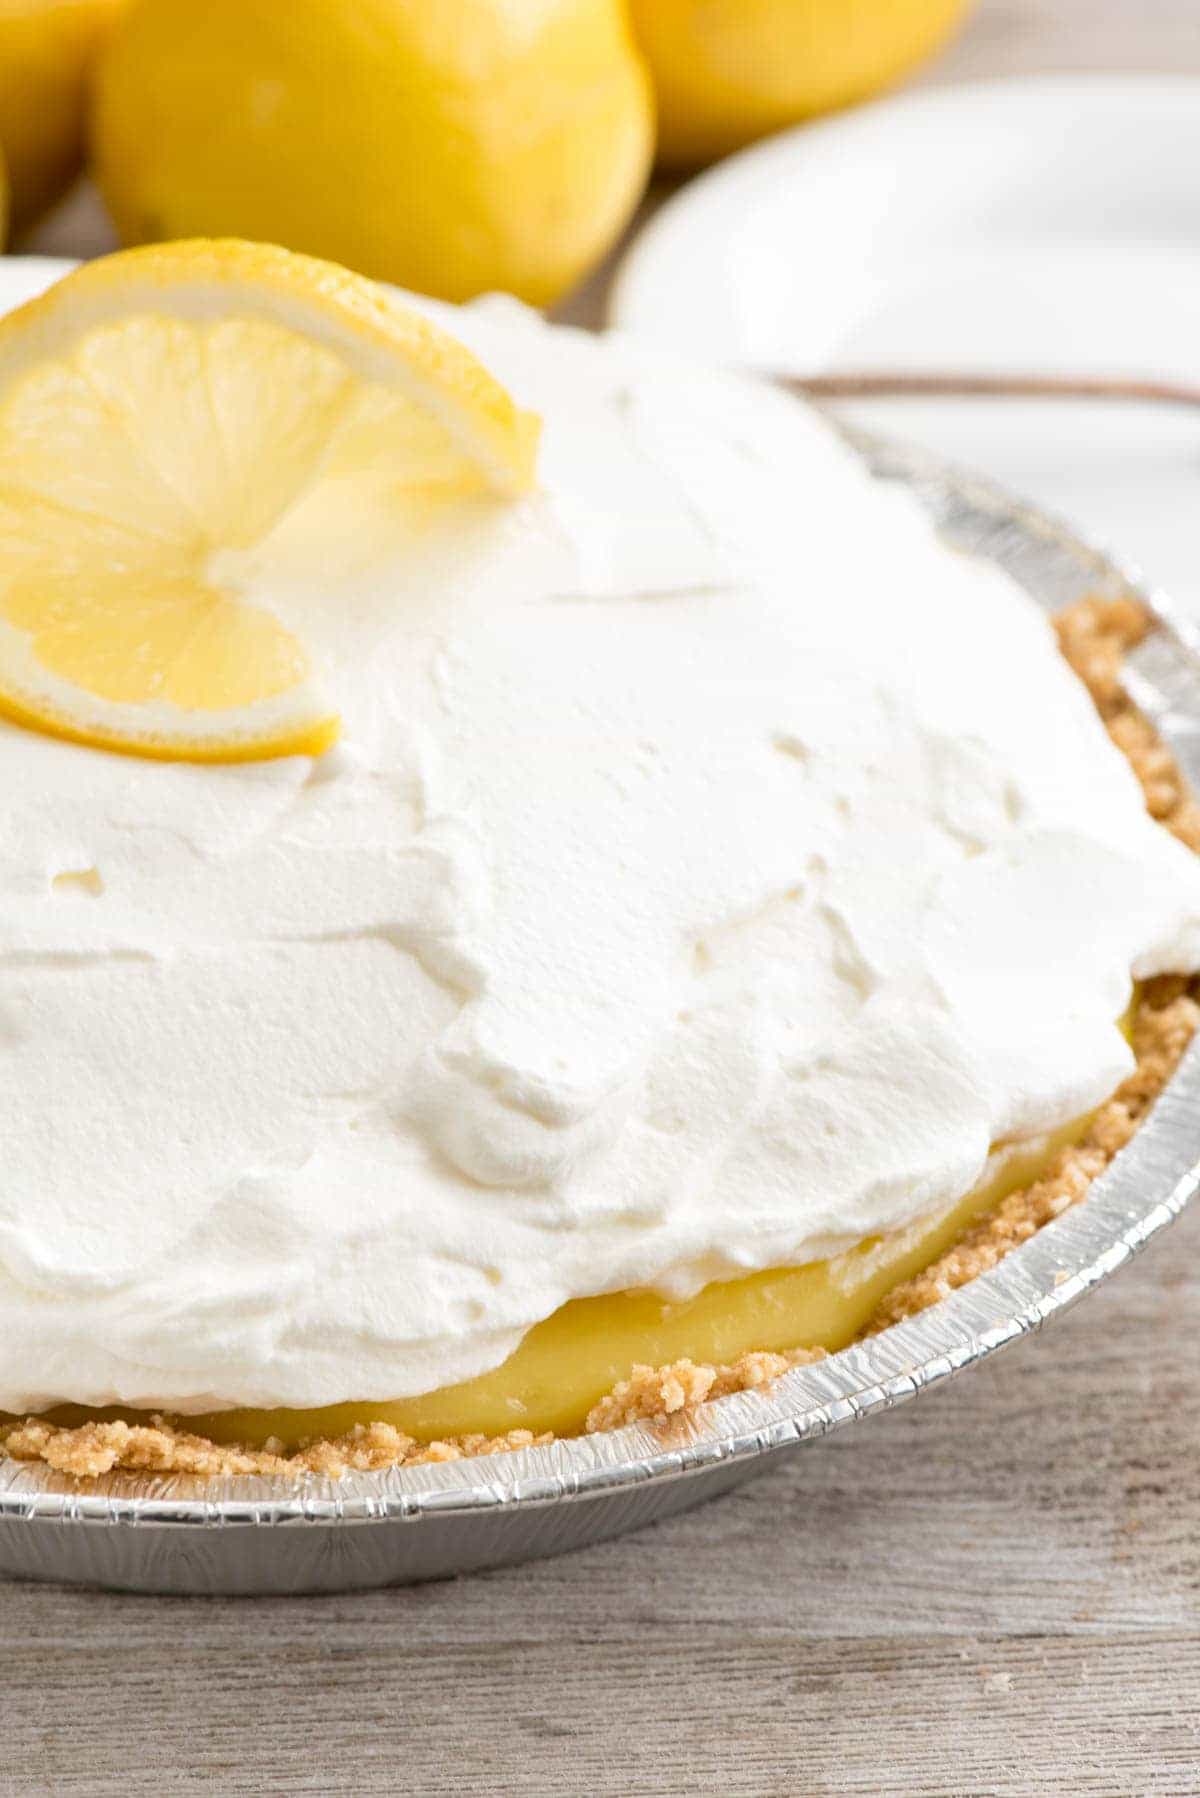 No Bake Lemon Cream Pie - this EASY lemon pie recipe has a homemade vanilla graham cracker crust and is filled with lemon and pudding!  It's the EASIEST lemon pie recipe ever!